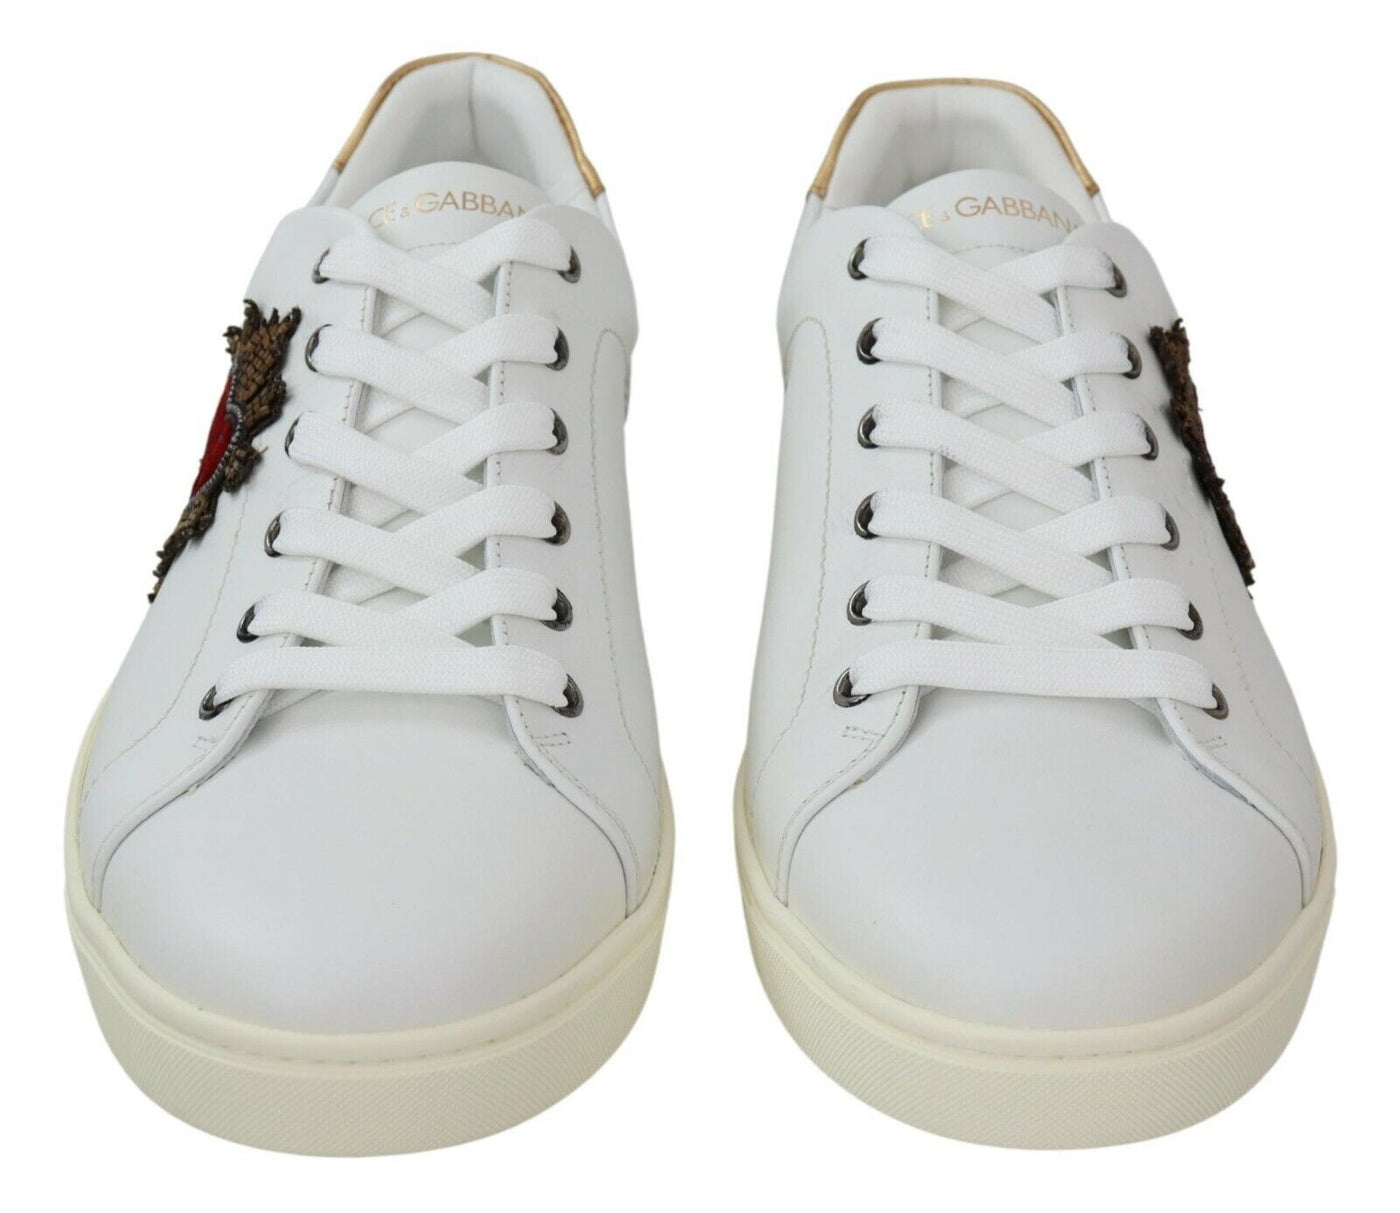 White Leather Heart Low Top Sneakers Casual Shoes